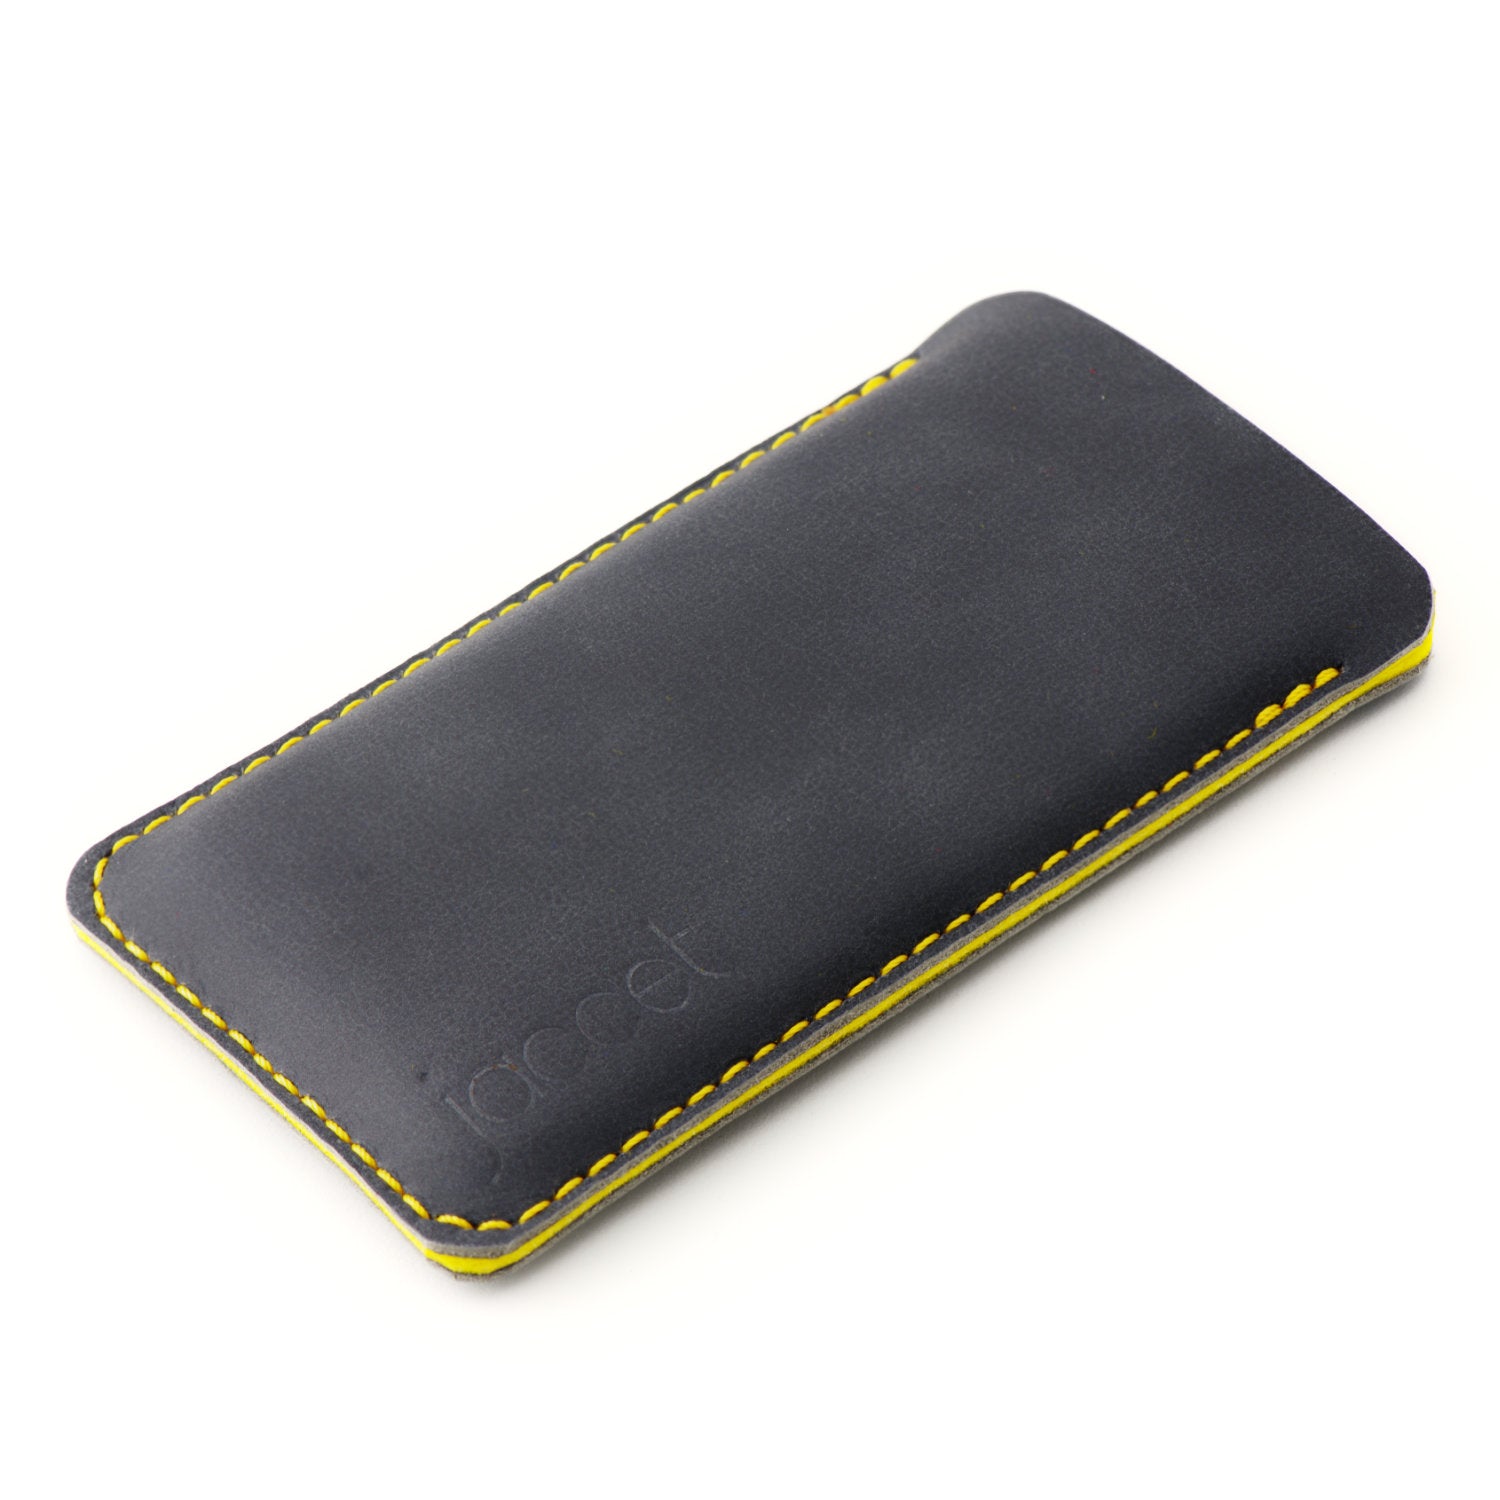 JACCET leather iPhone sleeve - anthracite/black leather with yellow wool felt. 100% Handmade